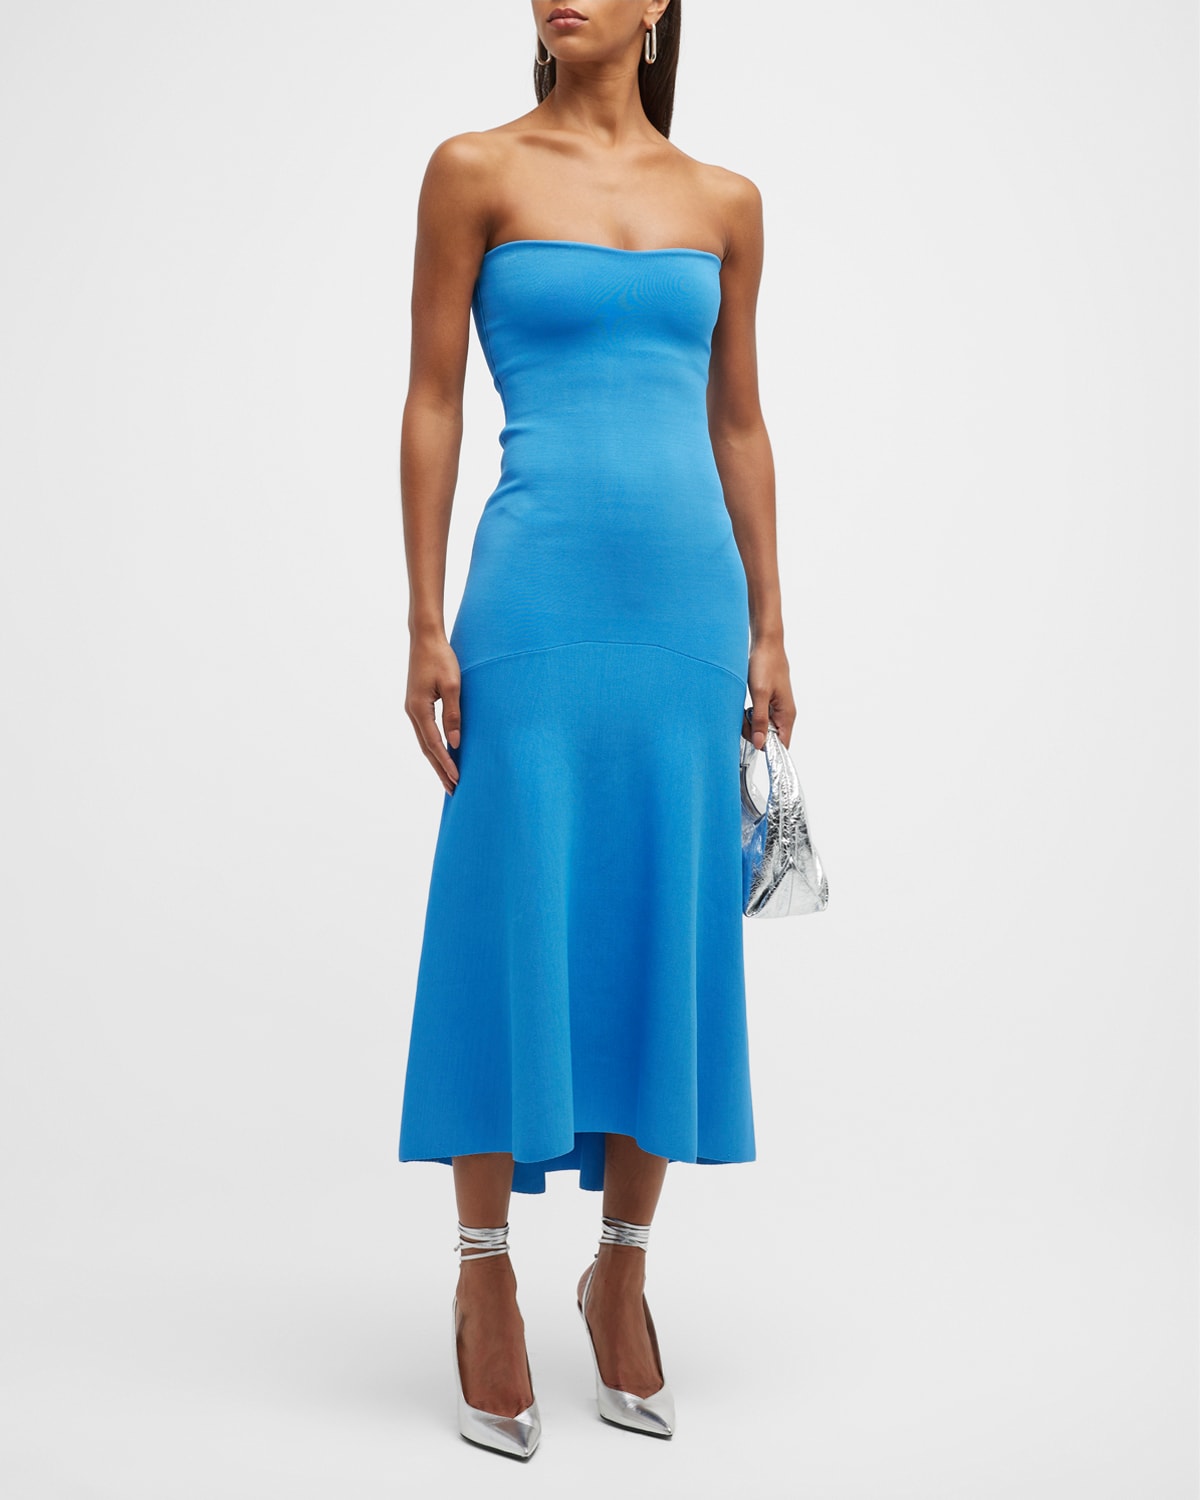 A.L.C DEAN STRAPLESS FIT-AND-FLARE MIDI DRESS